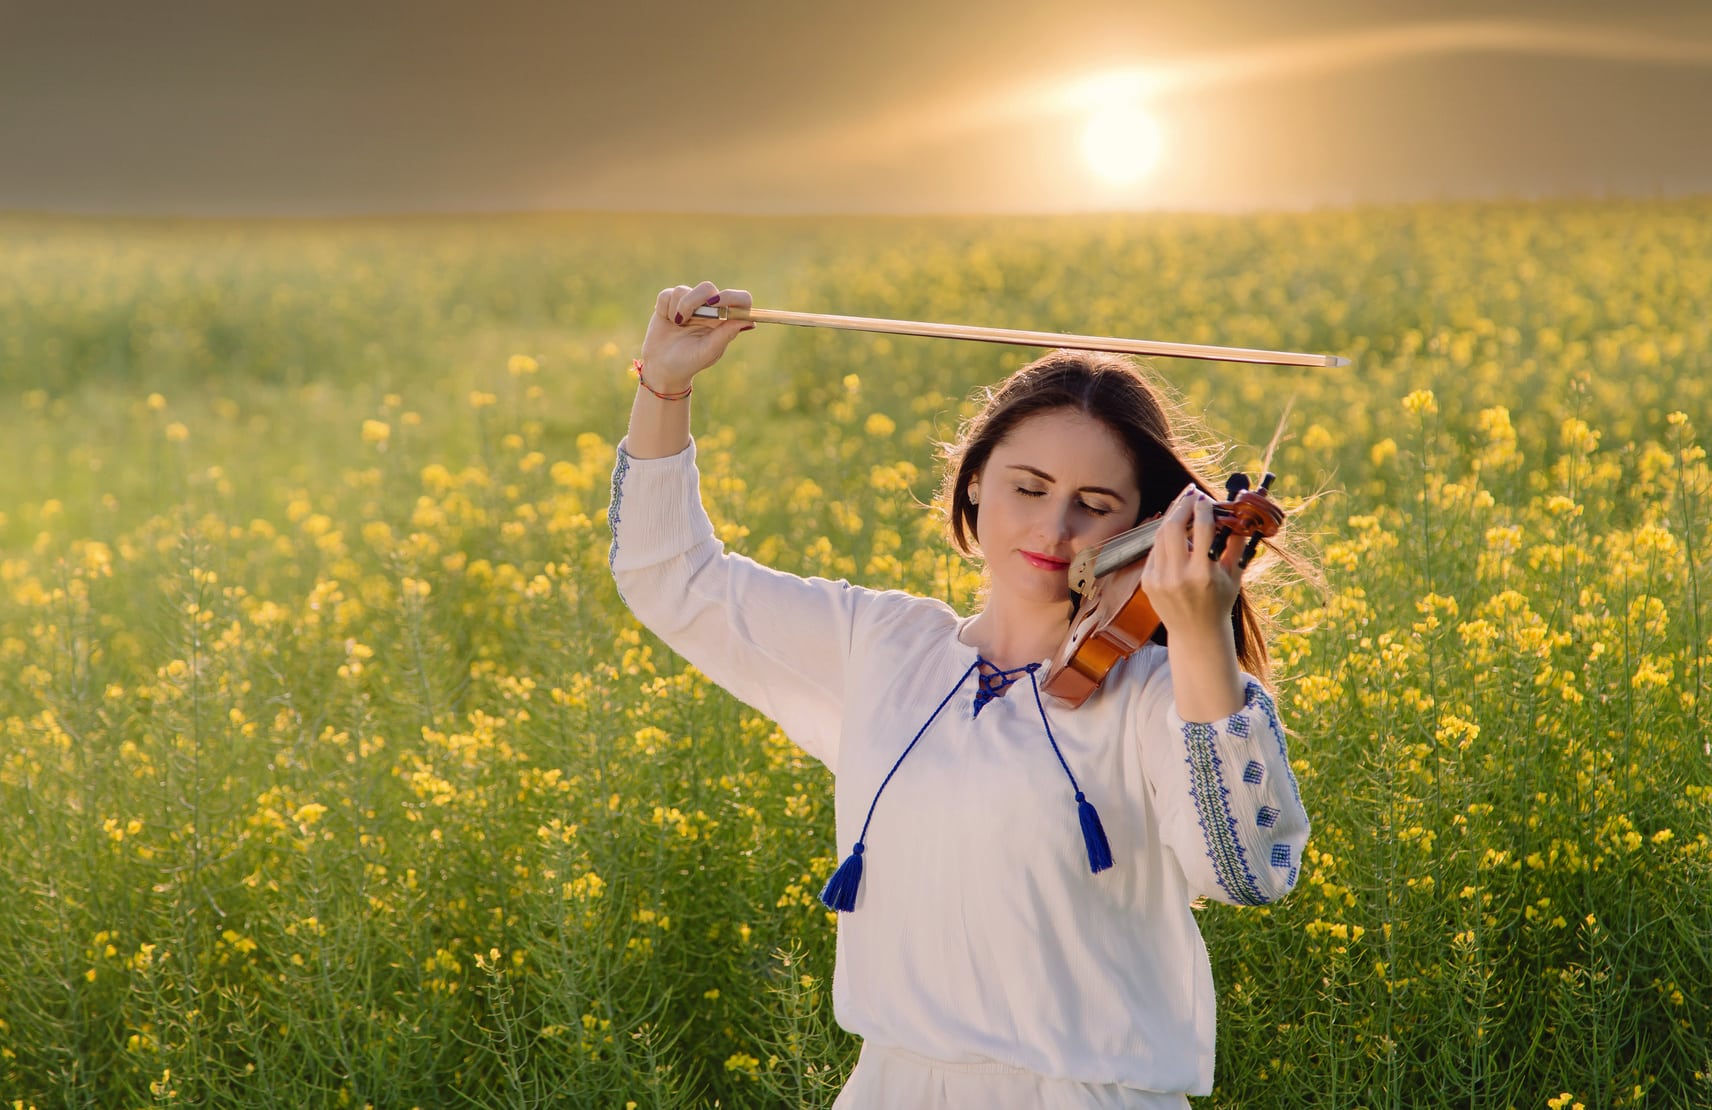 Young woman playing violin in a field at sunset